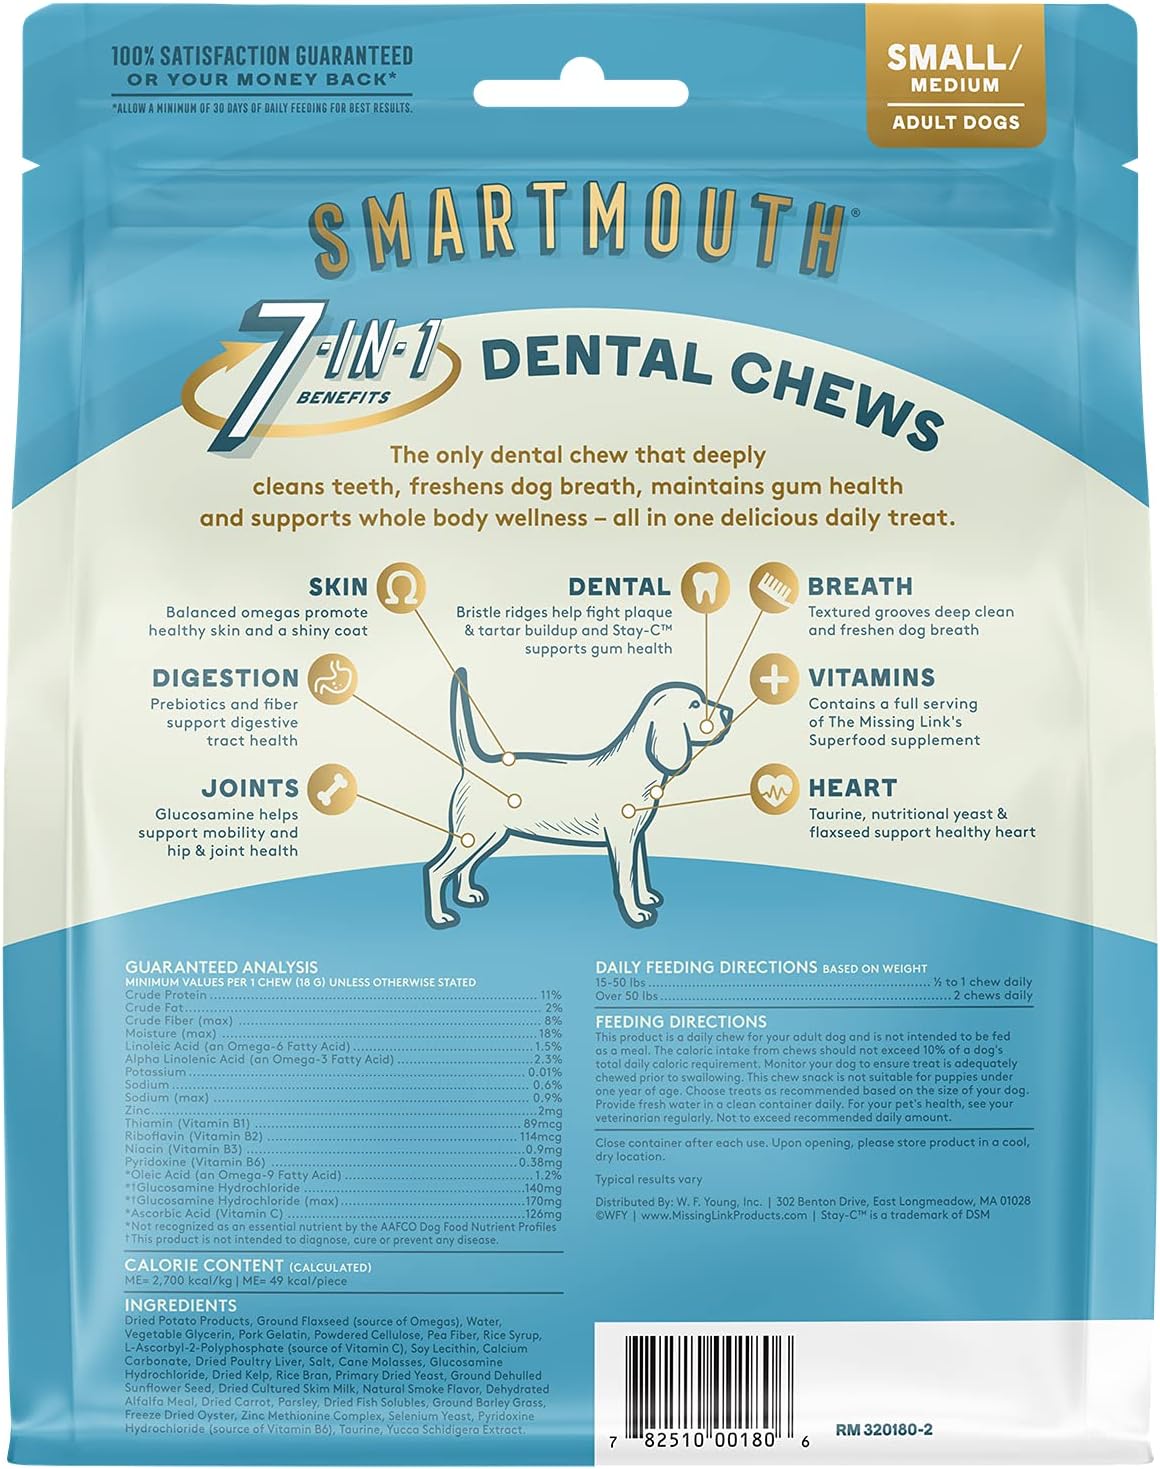 The Missing Link Smartmouth Vet Developed Dental Chew Treats, 7-in-1 Benefits: Healthy Teeth & Gums, Breath, Skin, Joints, Digestion, Heart, Immune System – Small/Medium 15-50lb Dogs, 28 Ct : Pet Supplies